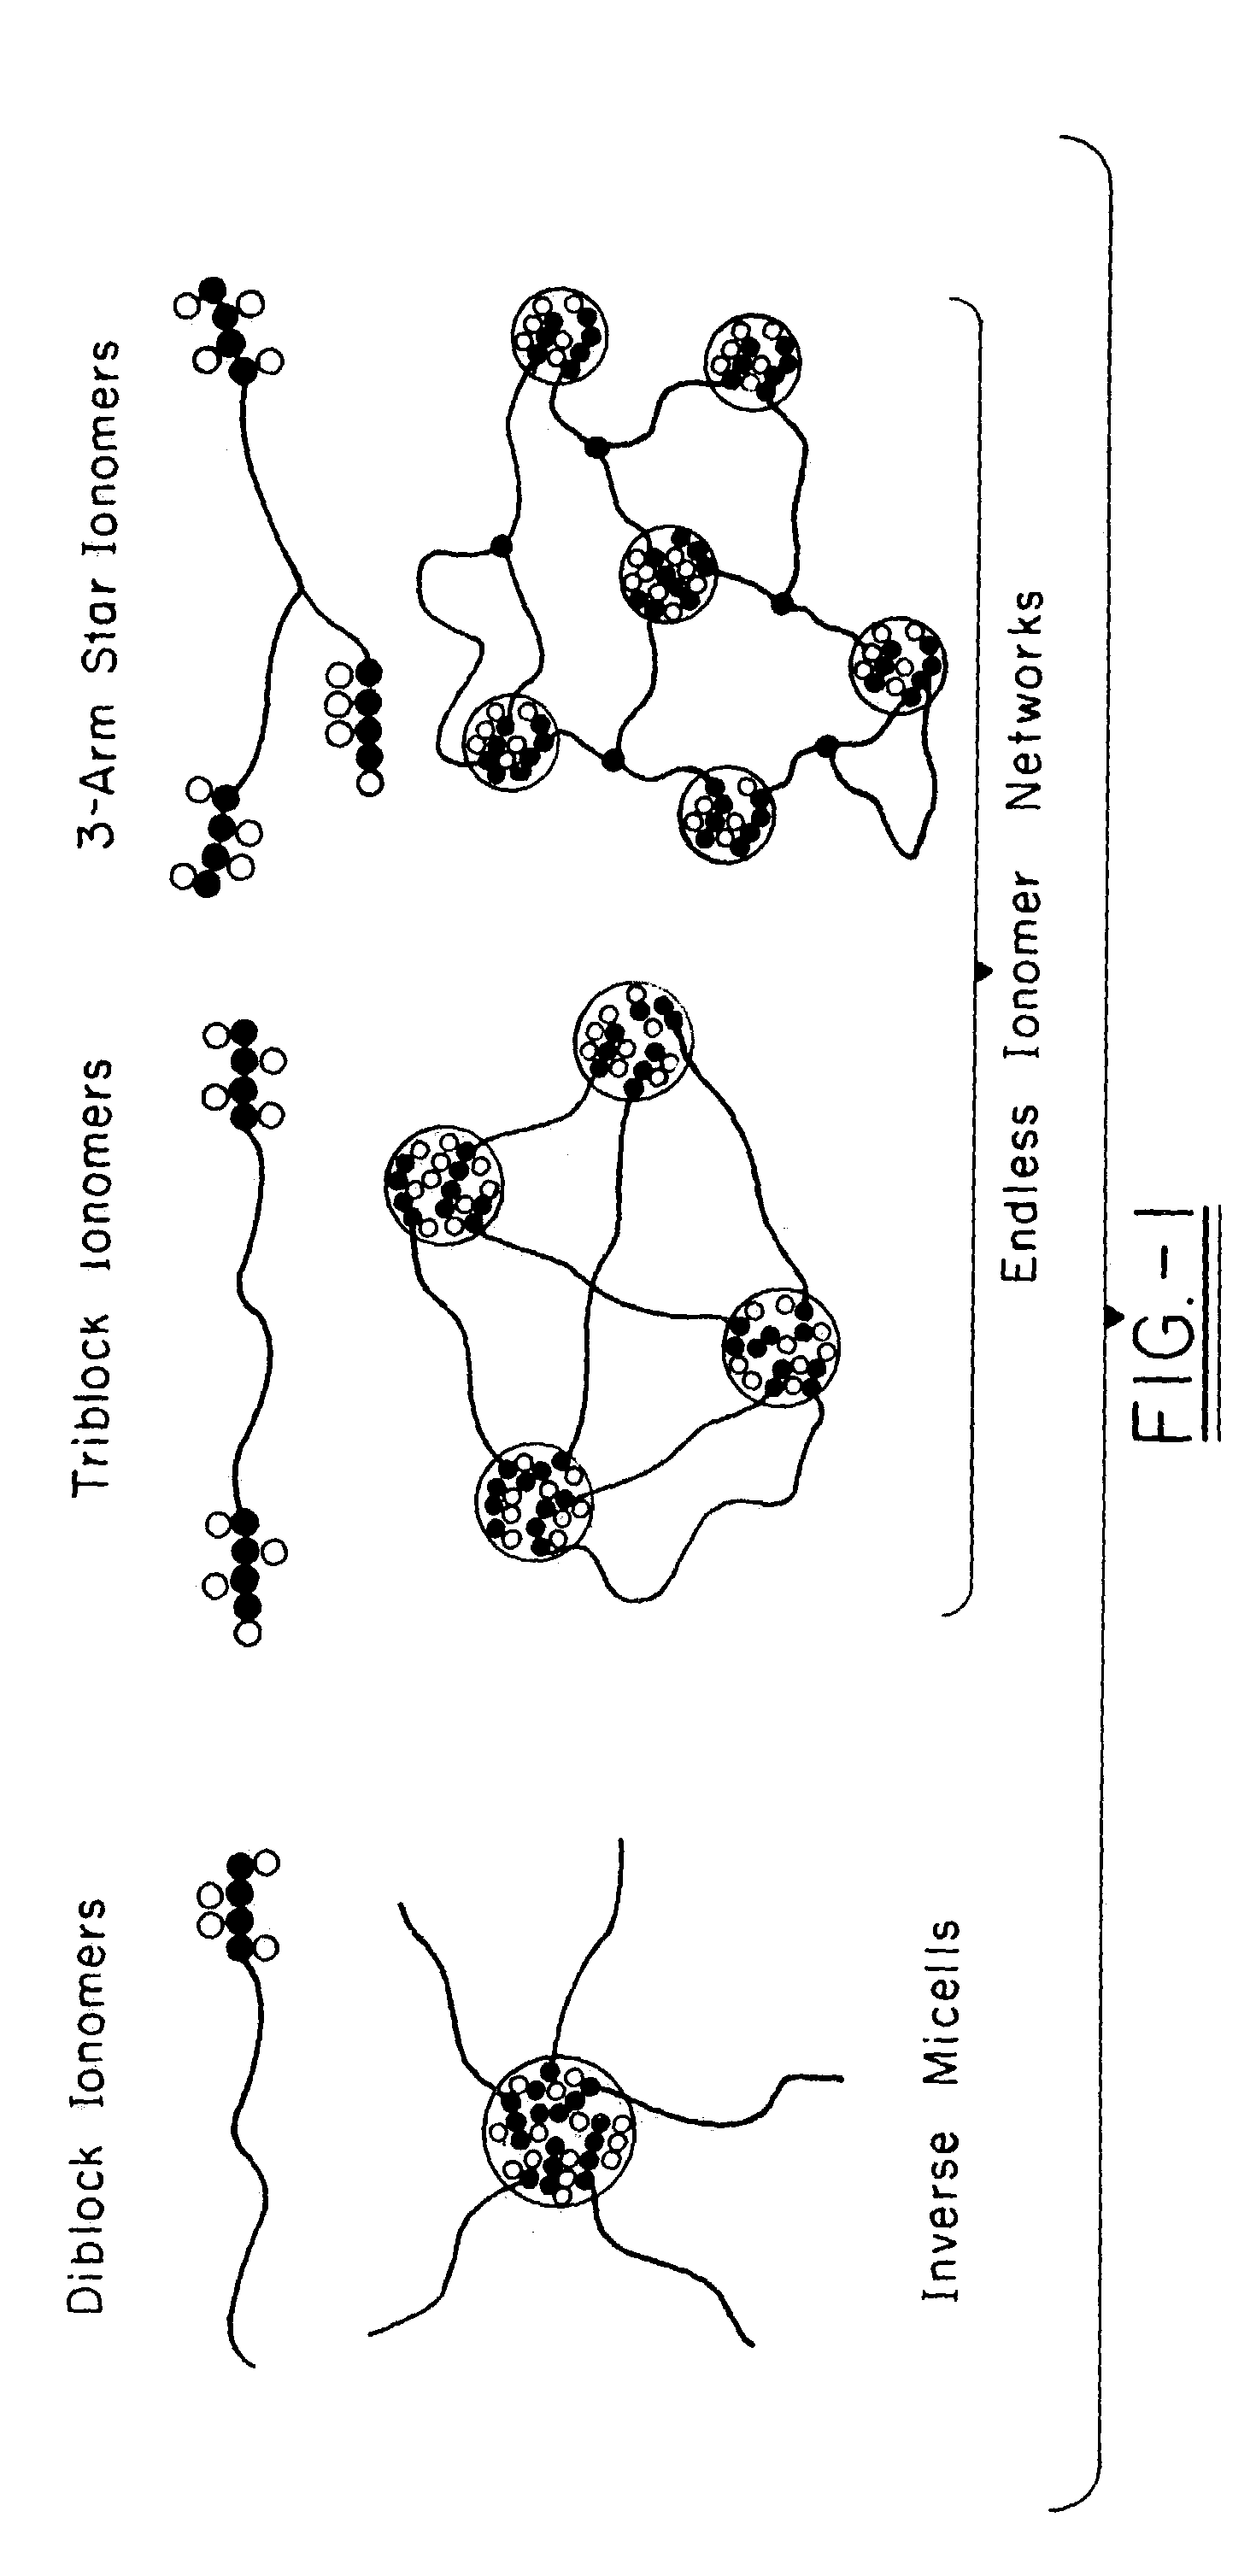 Polyisobutylene-based block anionomers and cationomers and synthesis thereof